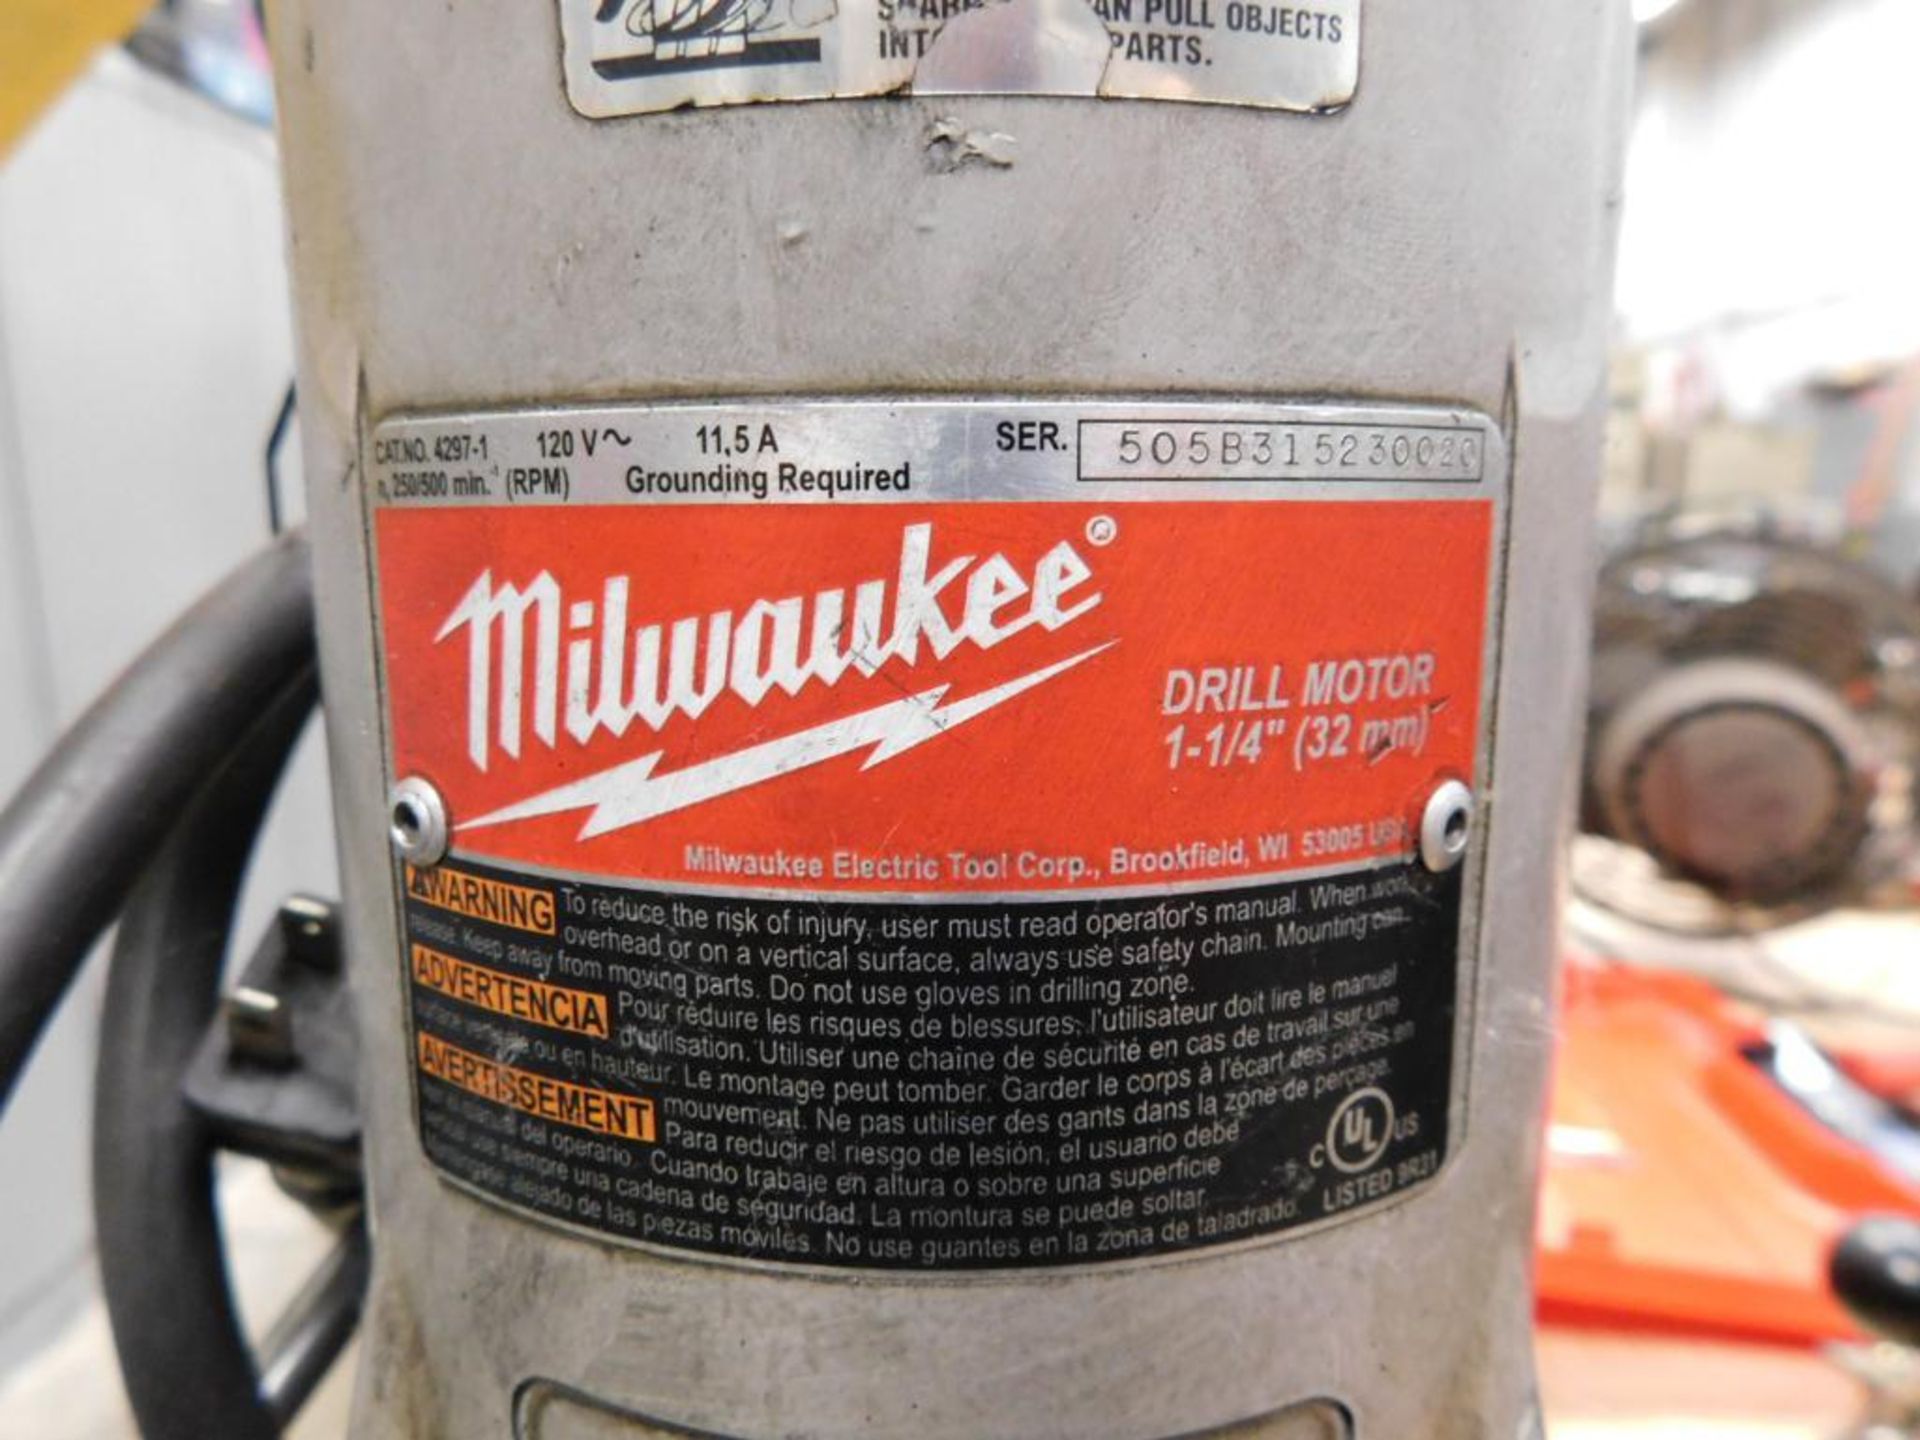 Milwaukee 1-1/4" Electromagnetic Drill Press - Image 4 of 4